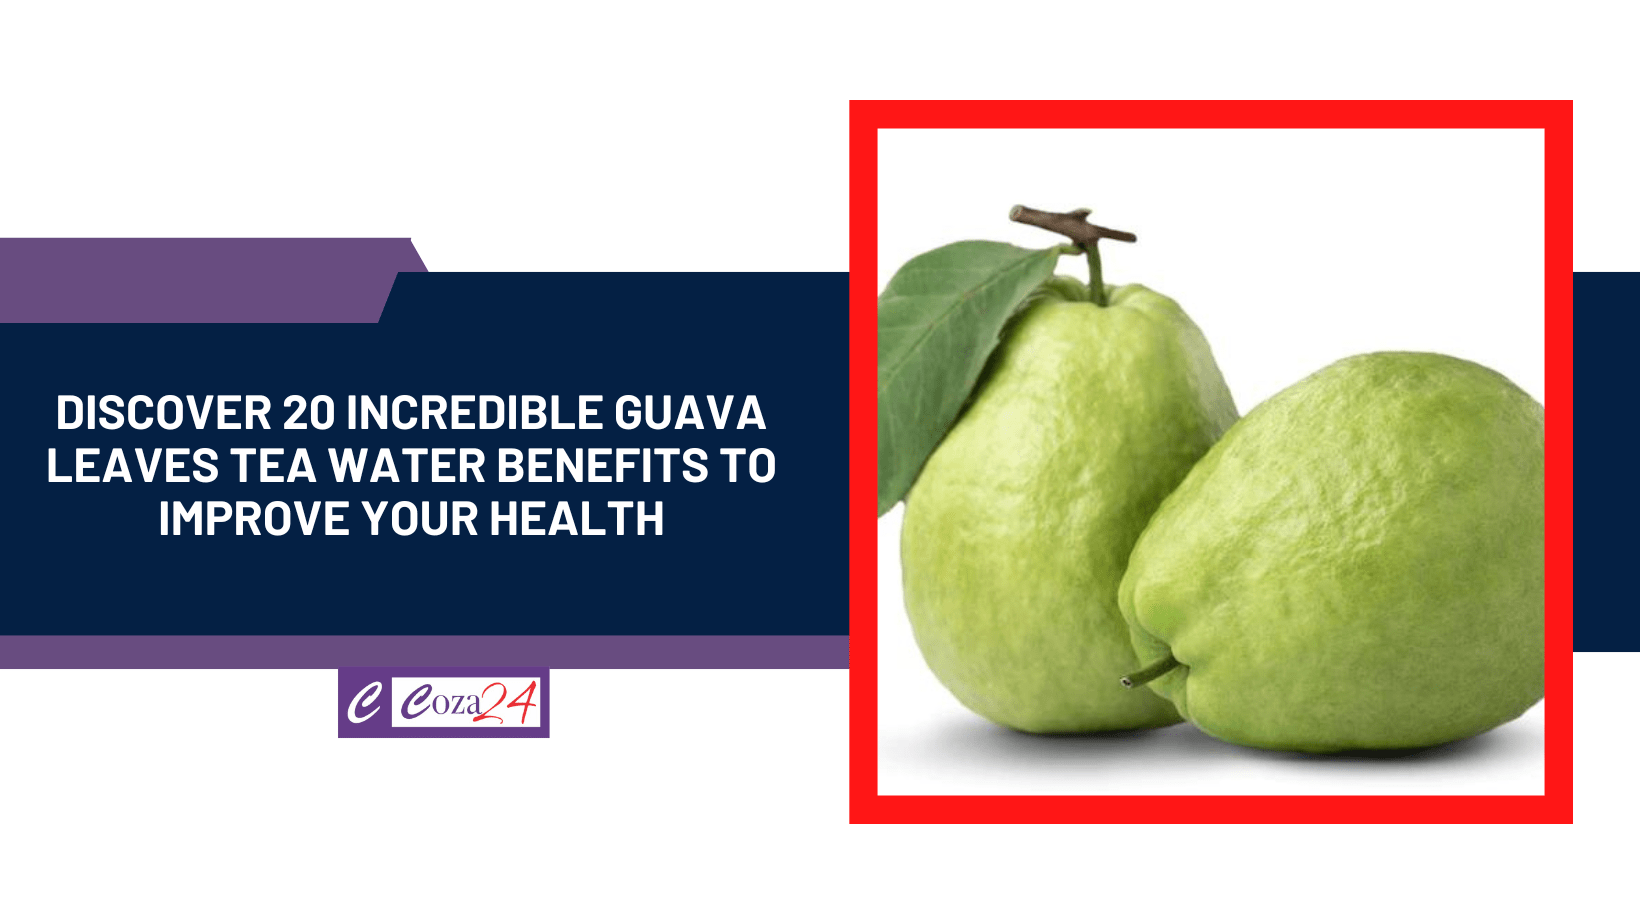 Discover 20 Incredible Guava Leaves Tea Water Benefits To Improve Your Health